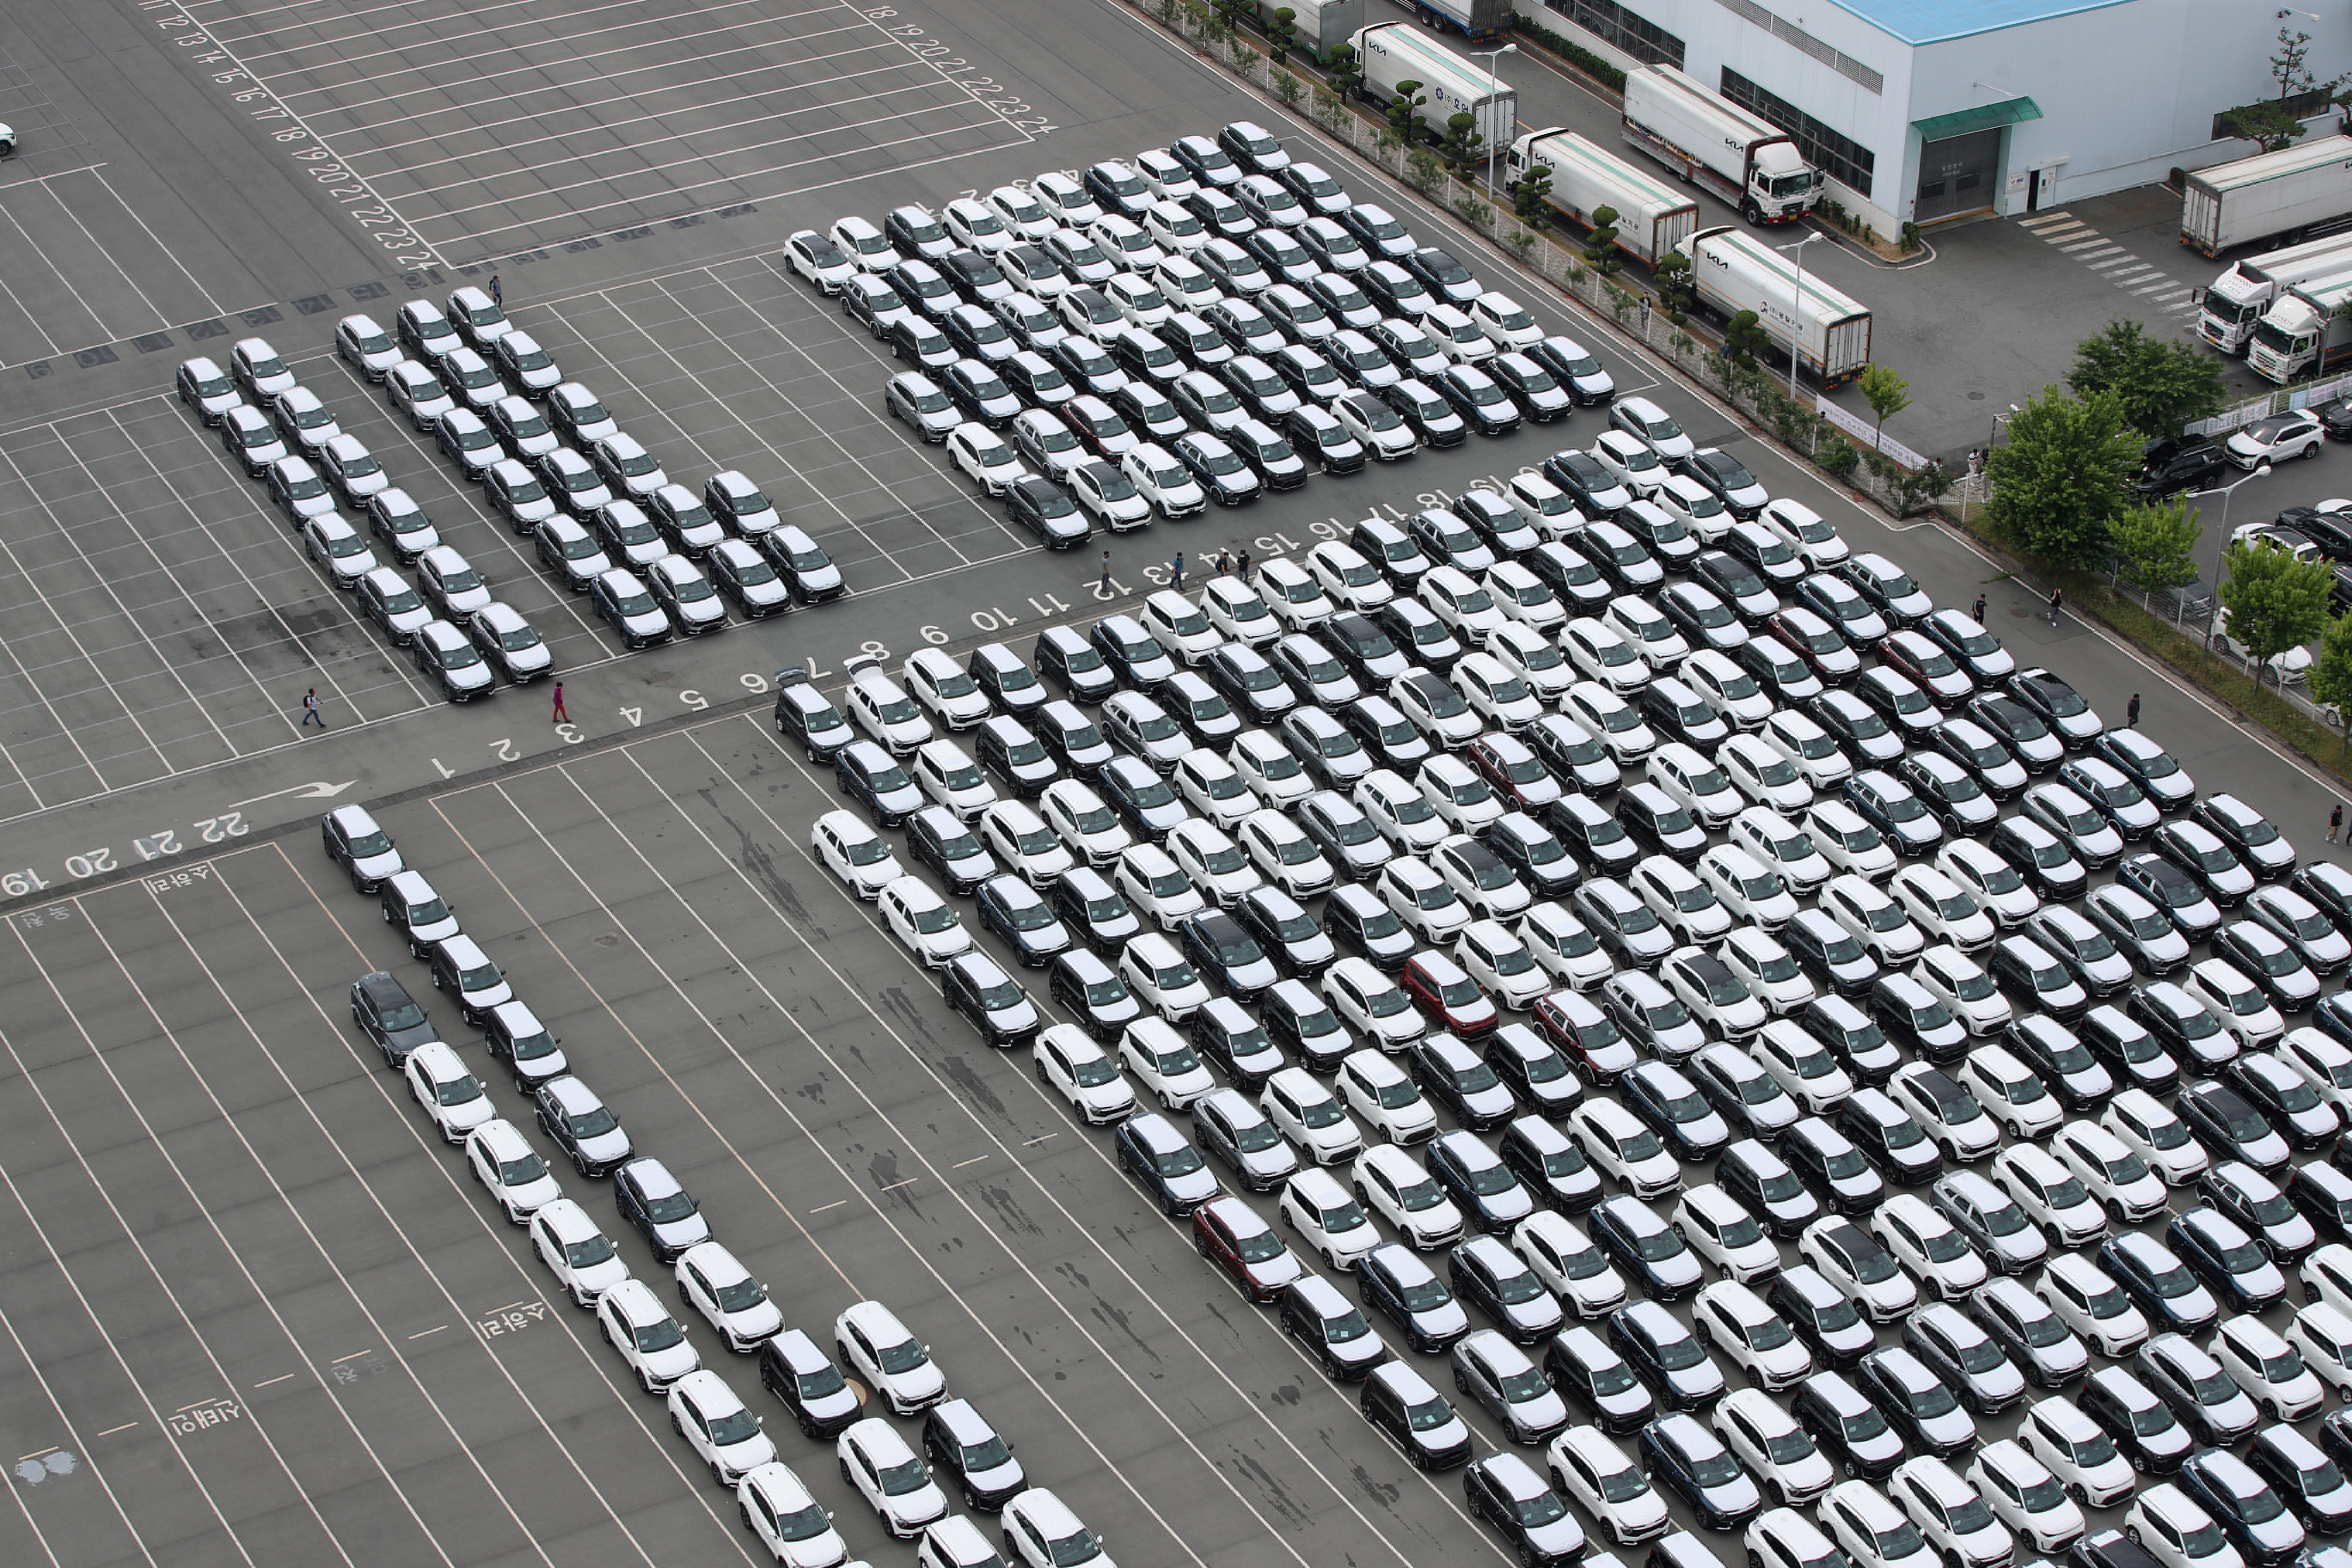 A general view of Kia Motor's finished cars parked and waiting to be transported by car carriers which are now on strike at their factory, in Gwangju